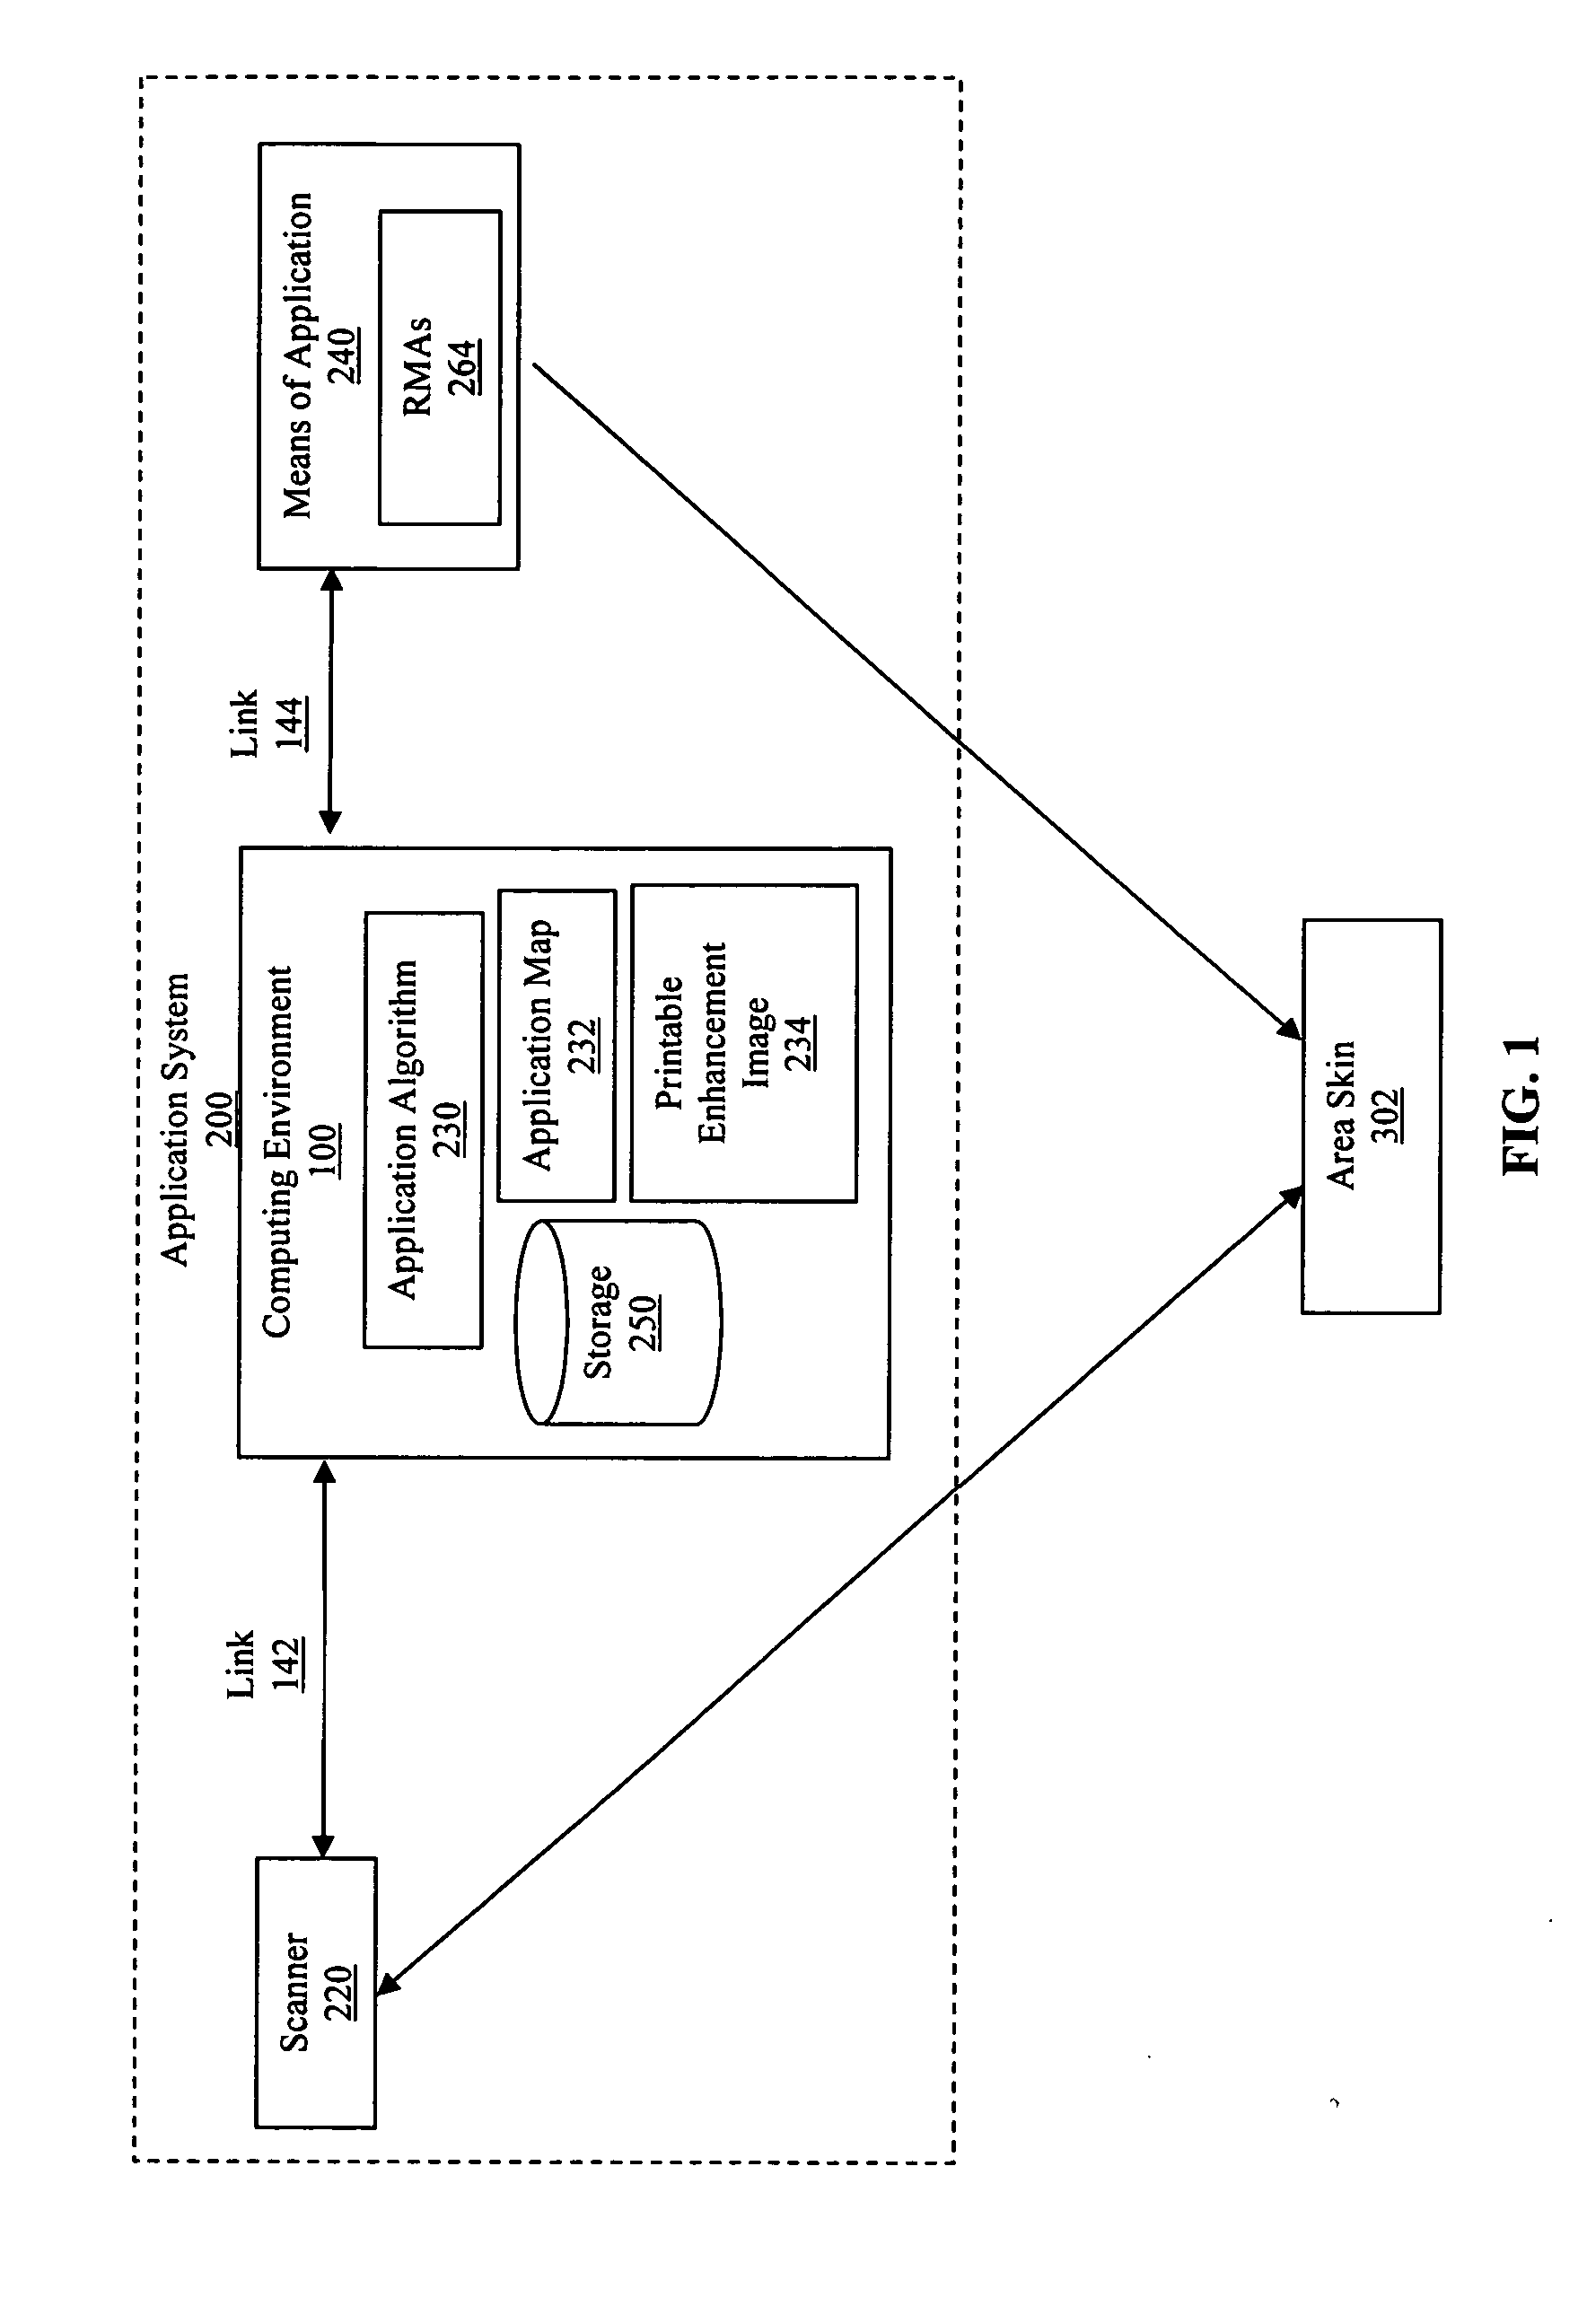 System and method for medical monitoring and treatment through cosmetic monitoring and treatment